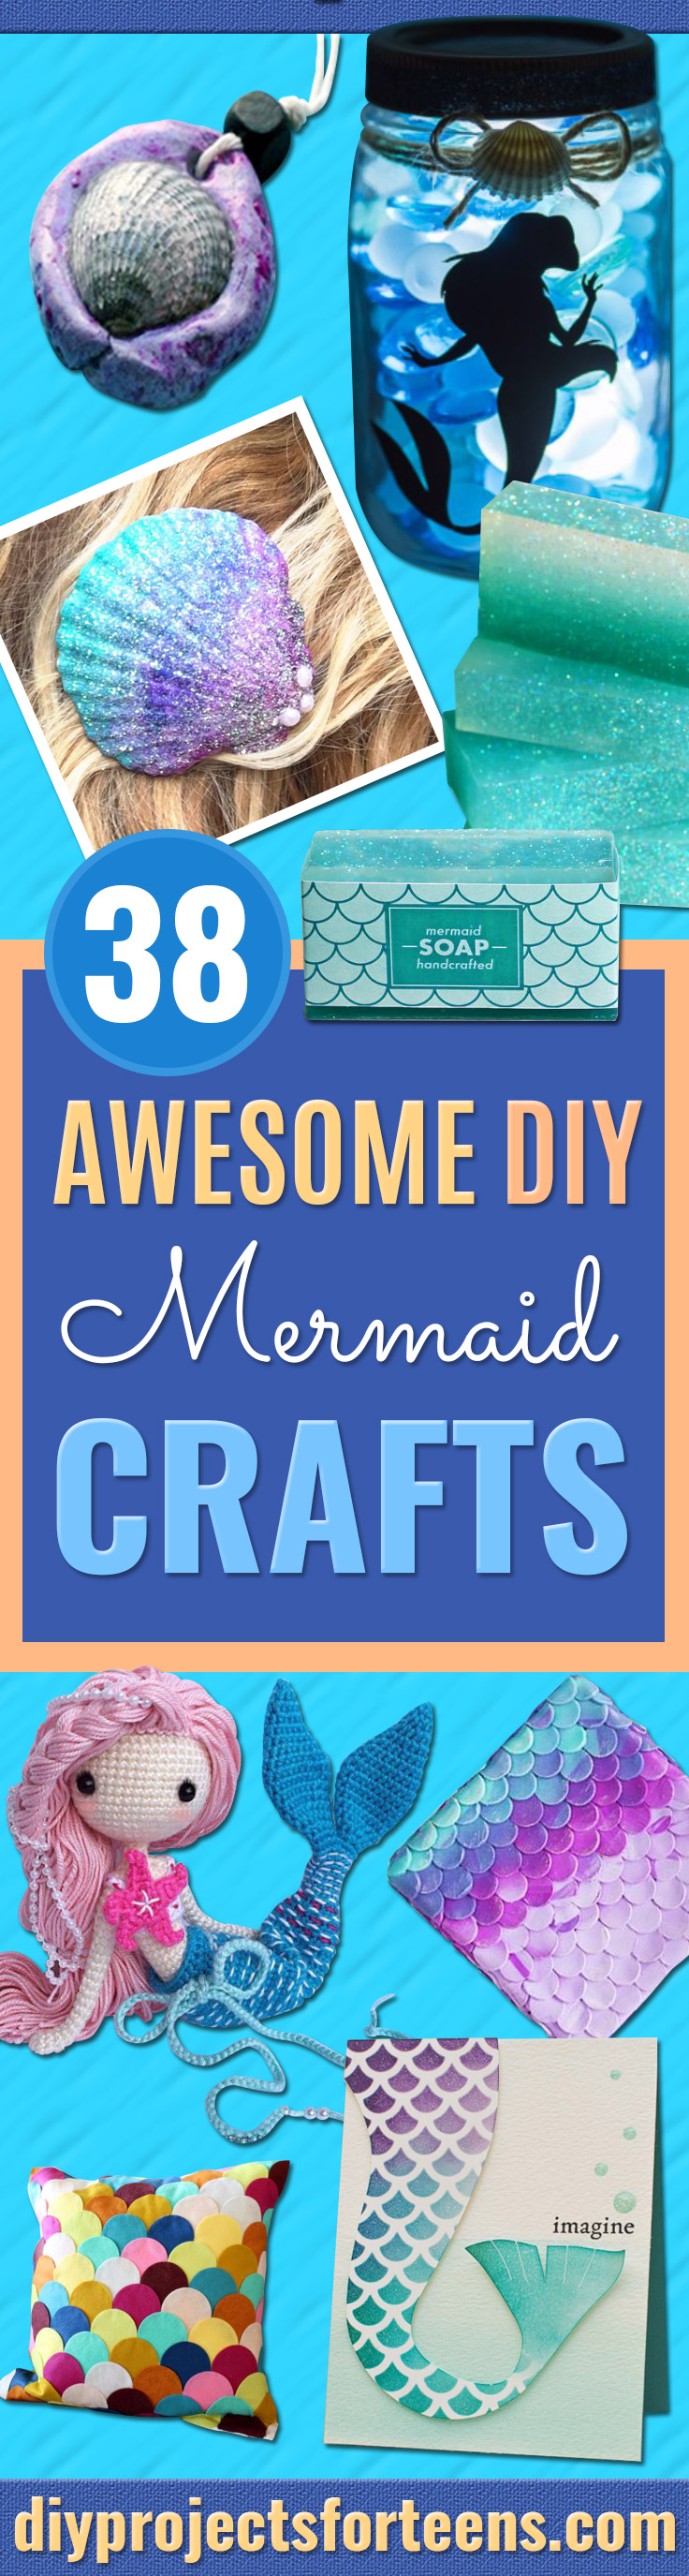 DIY Mermaid Crafts - 30 Minute Mermaid Skirt - How To Make Room Decorations, Art Projects, Jewelry, and Makeup For Kids, Teens and Teenagers - Mermaid Costume Tutorials - Fun Clothes, Pillow Projects, Mermaid Tail Tutorial http://stage.diyprojectsforteens.com/diy-mermaid-crafts